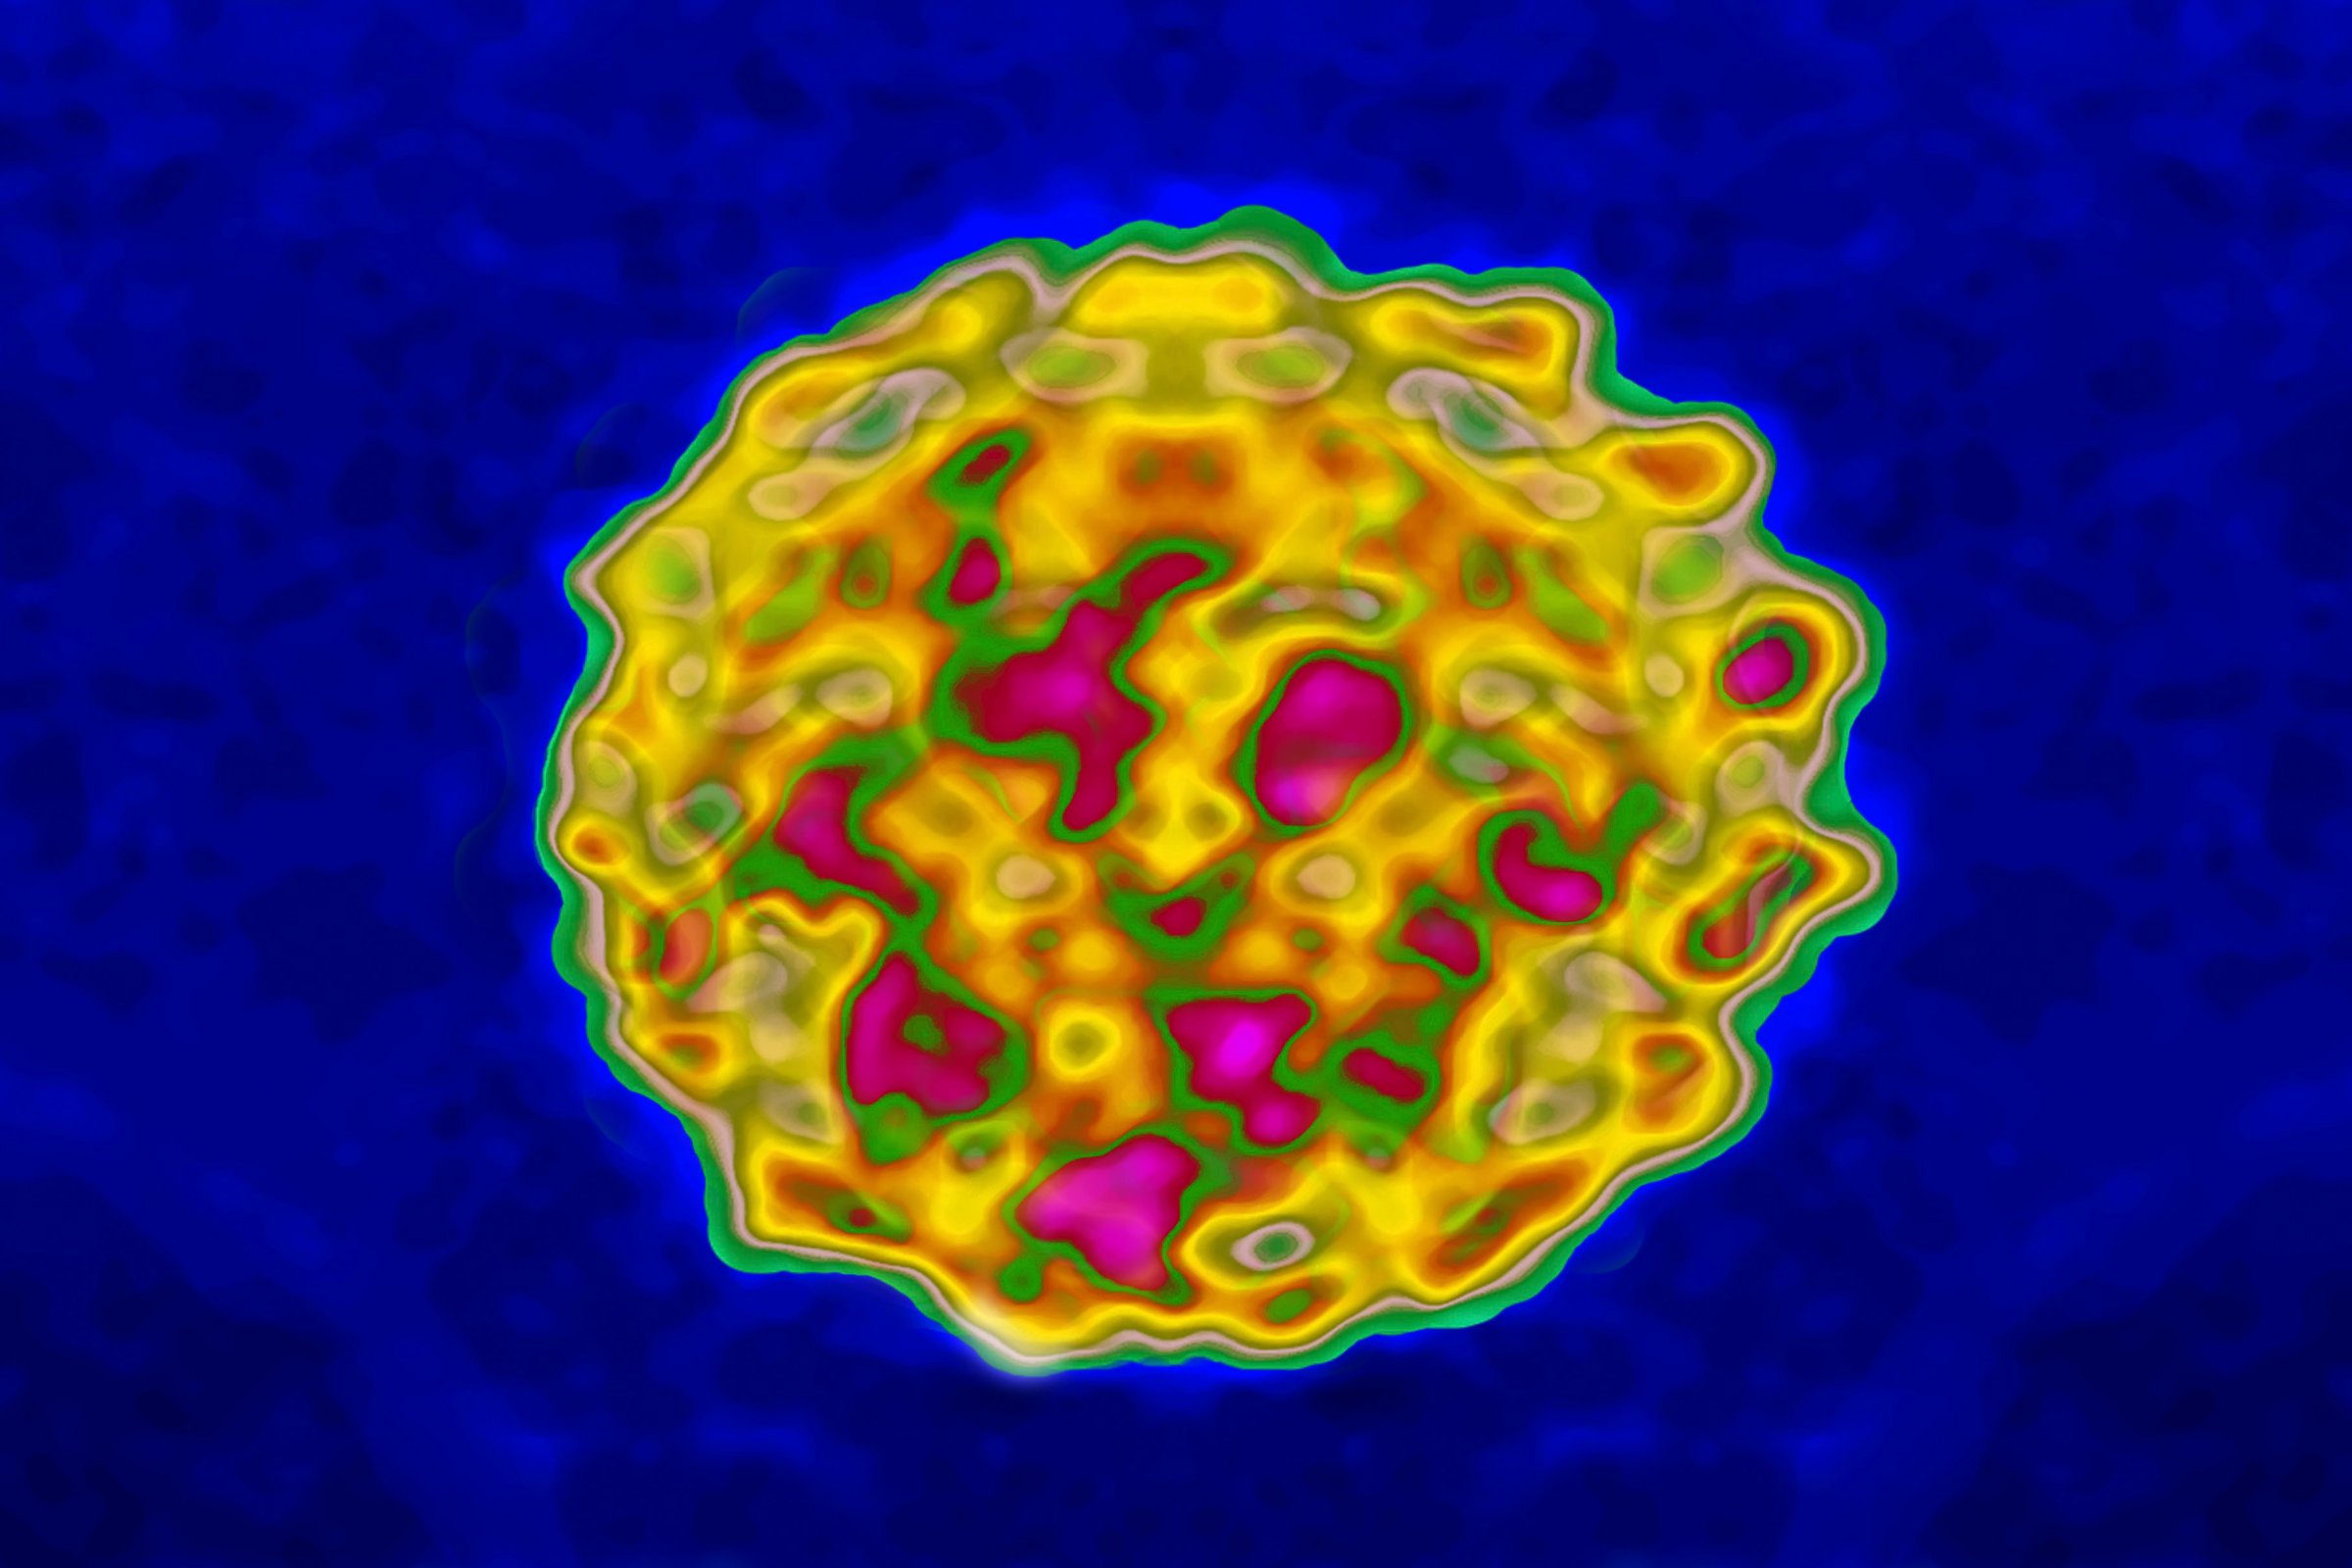 A representation of the Papilloma Virus(HPV) based on an electronic microscope magnification At 300000X.